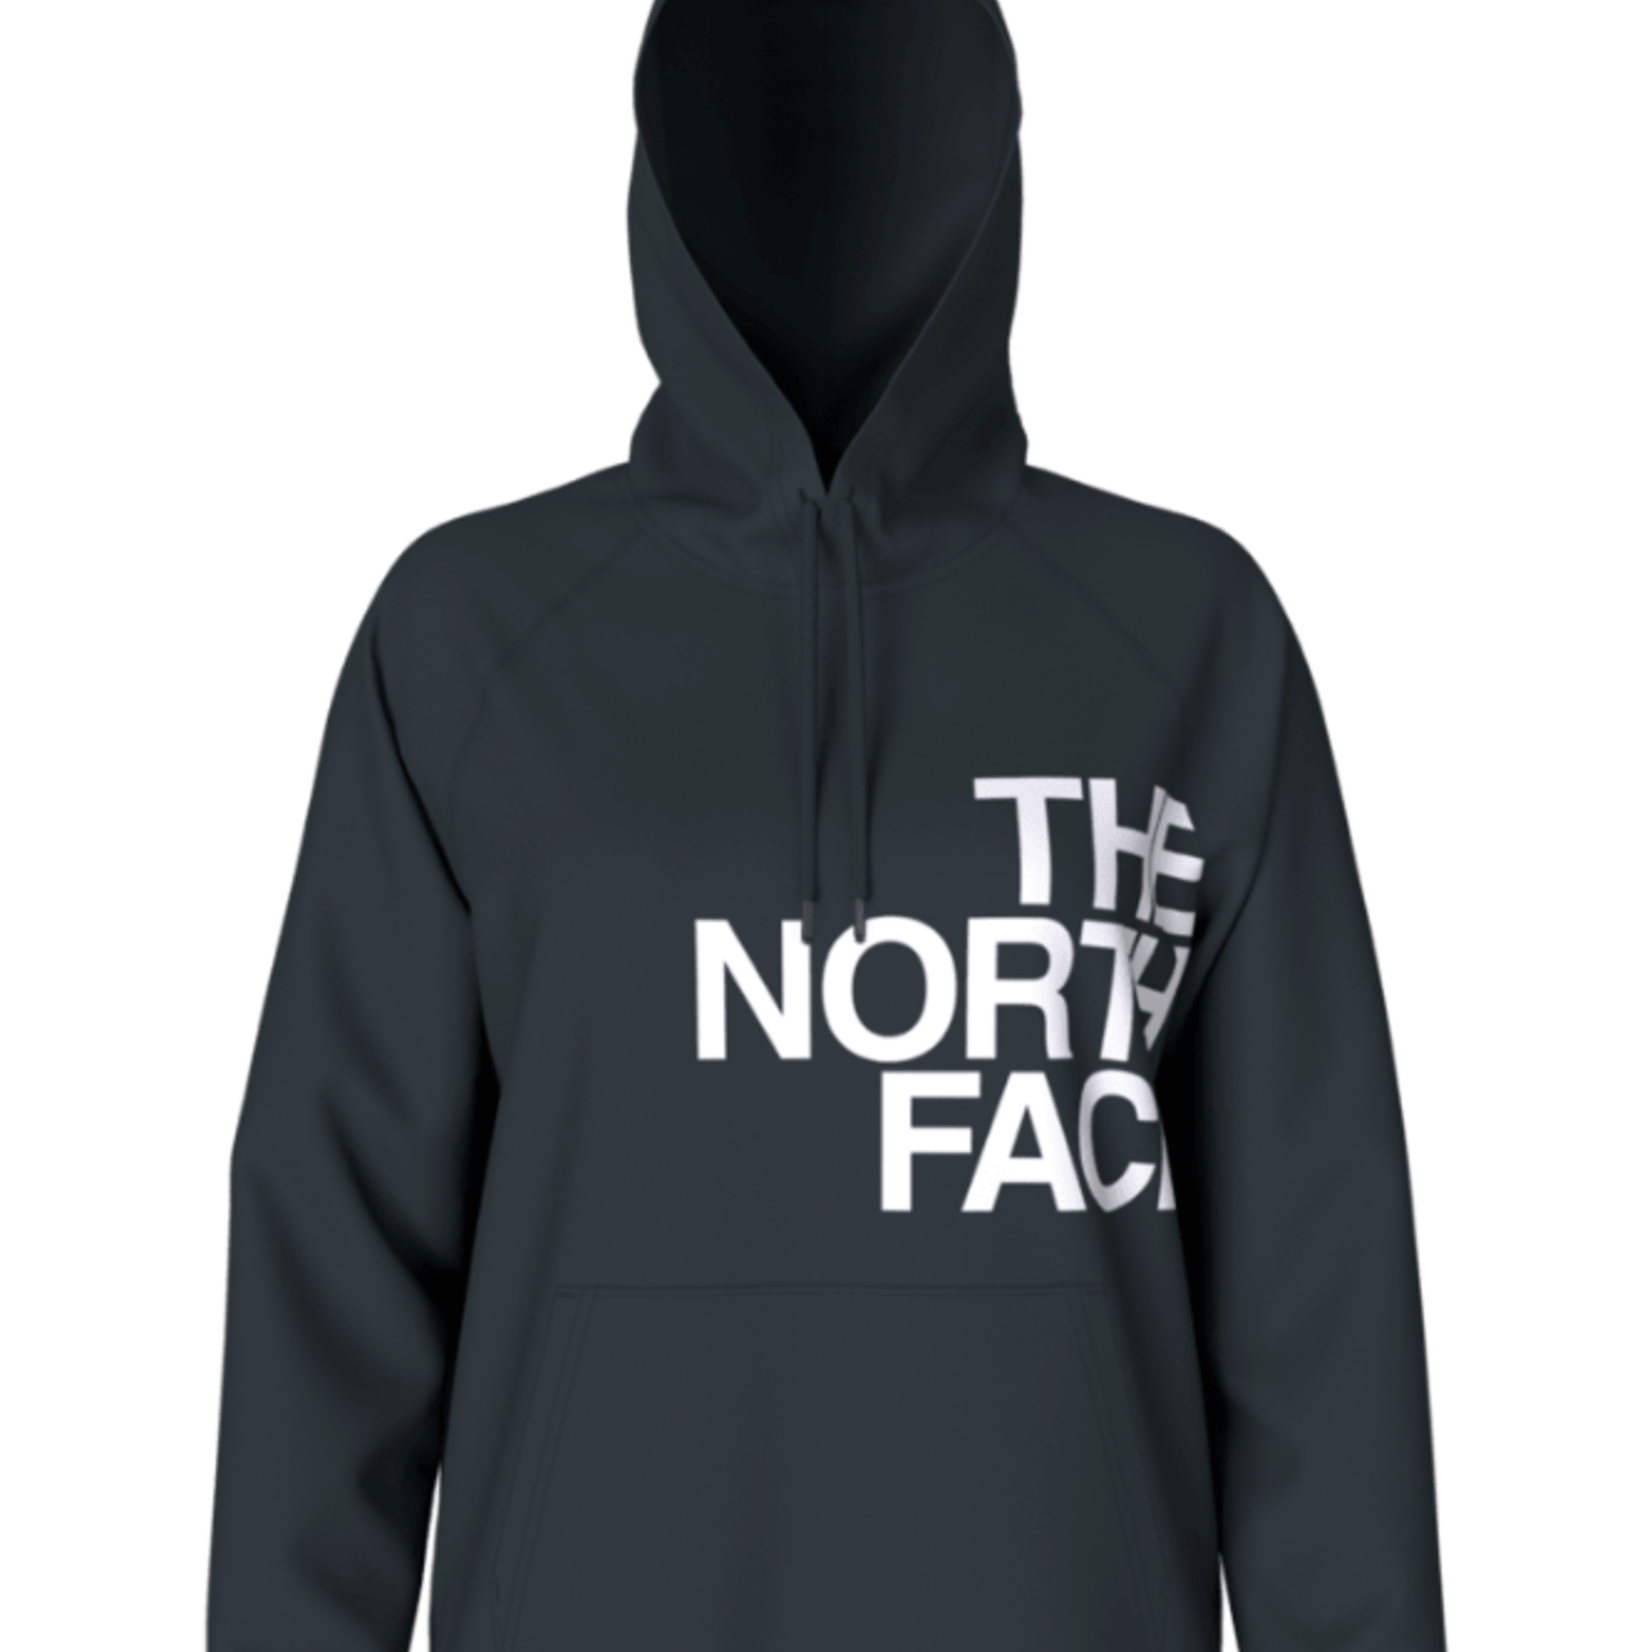 The North Face The North Face Hoodie, Brand Proud Pullover, Ladies